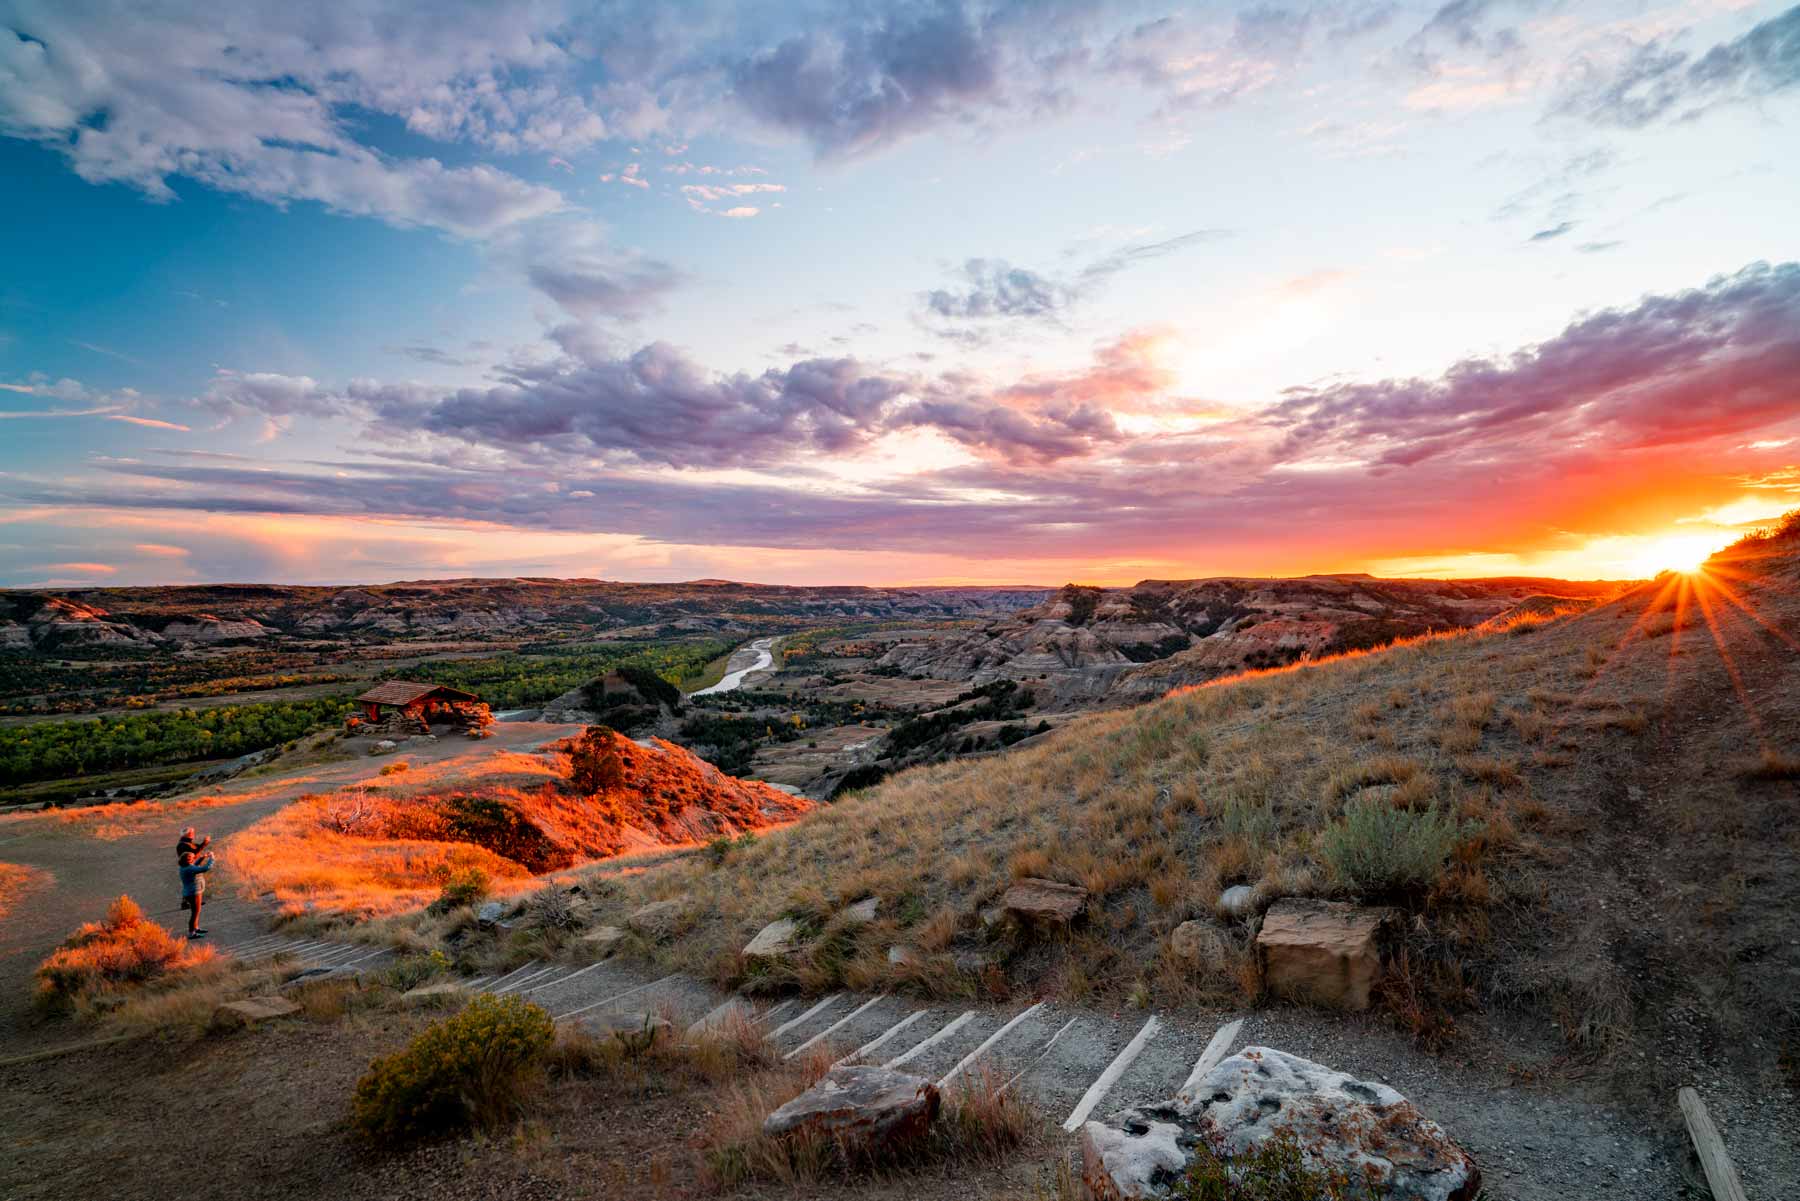 Riverbend Overlook |Theodore Roosevelt National Park Facts